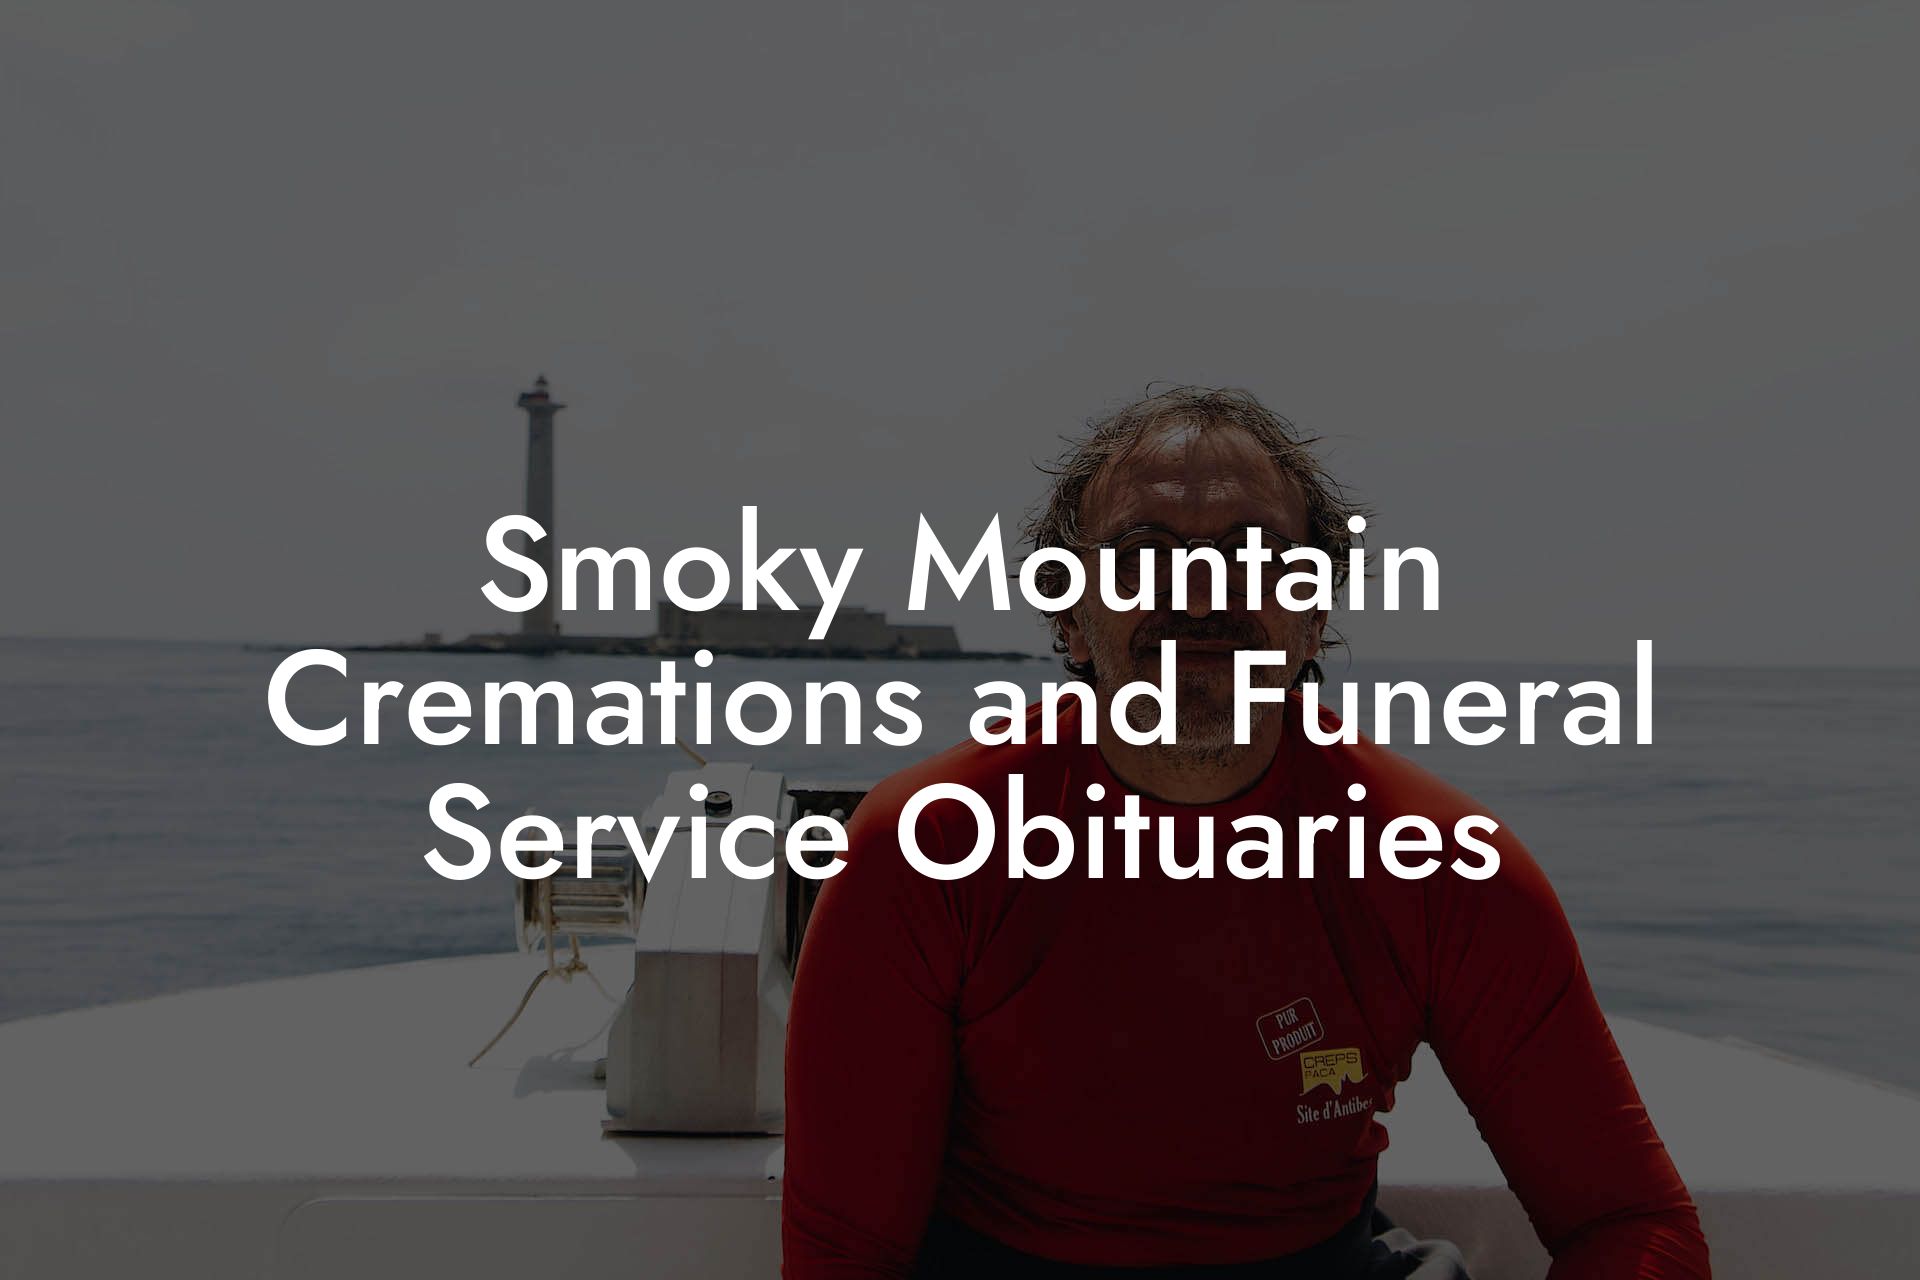 Smoky Mountain Cremations and Funeral Service Obituaries